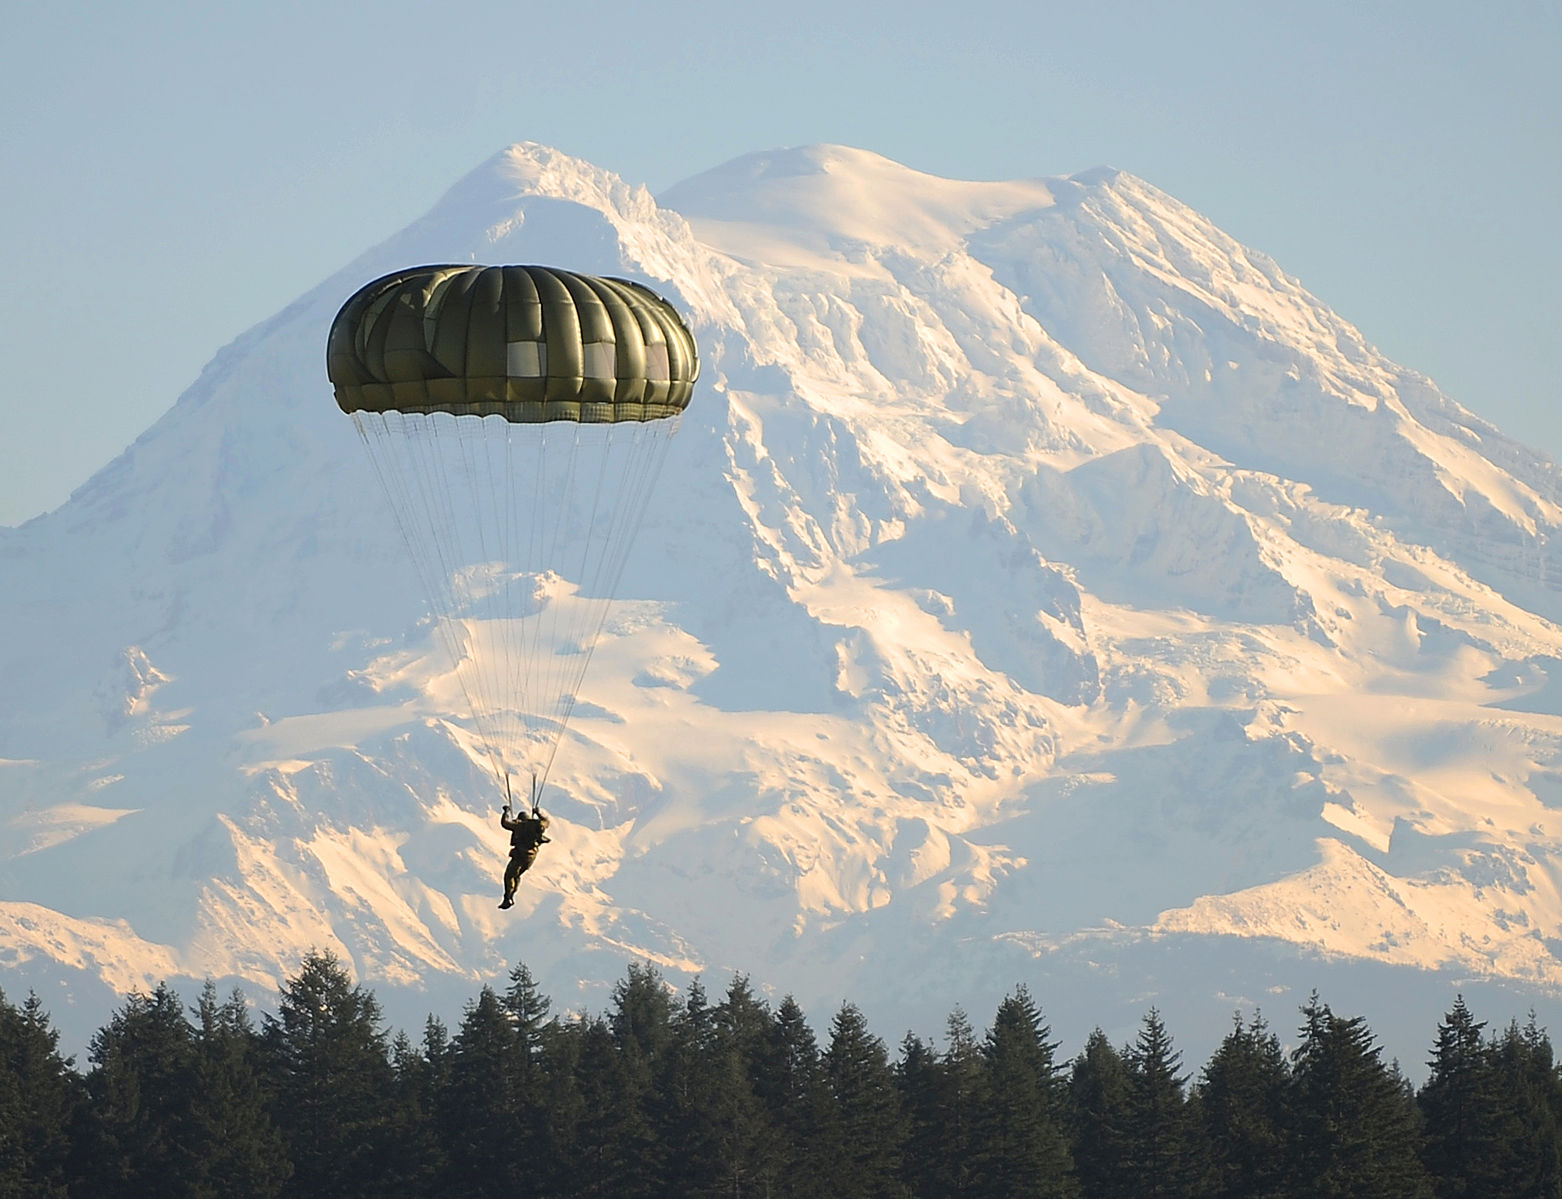 U.S. Army parachute jump with Mt. Rainier in the background